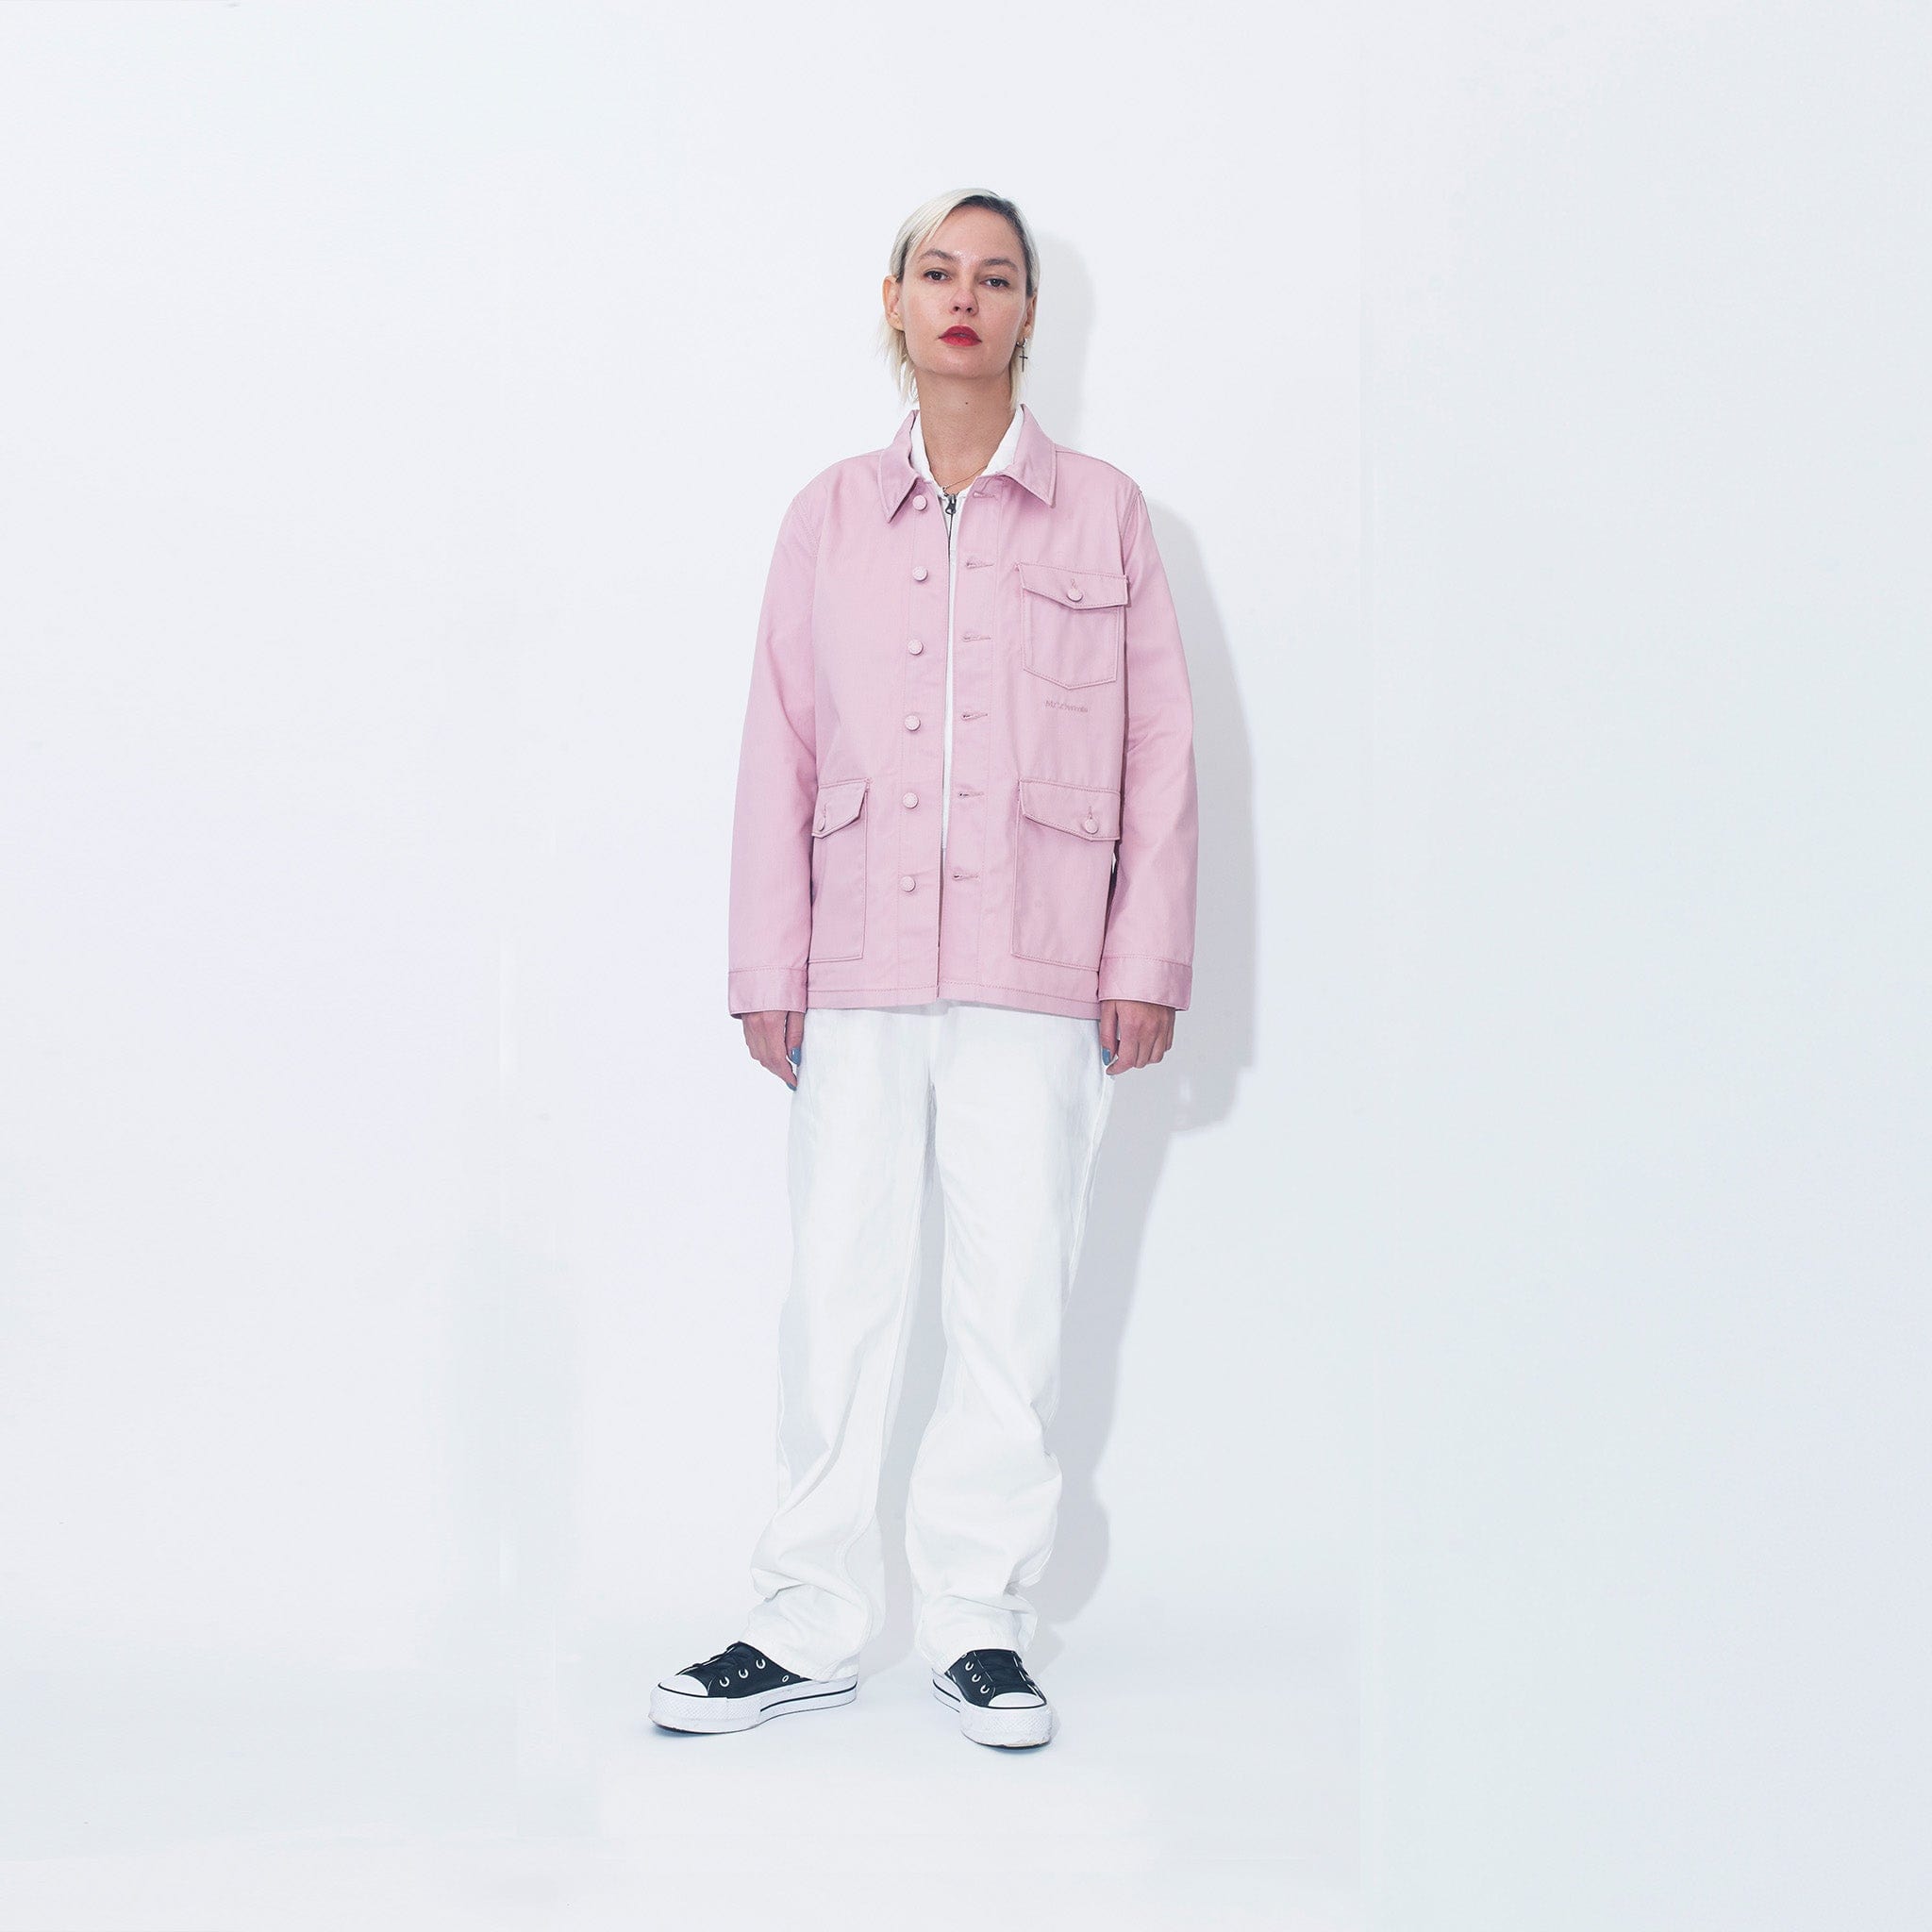 Premium Workwear Staples, Dusty Pink Work Jacket Paired With White Work Trousers.